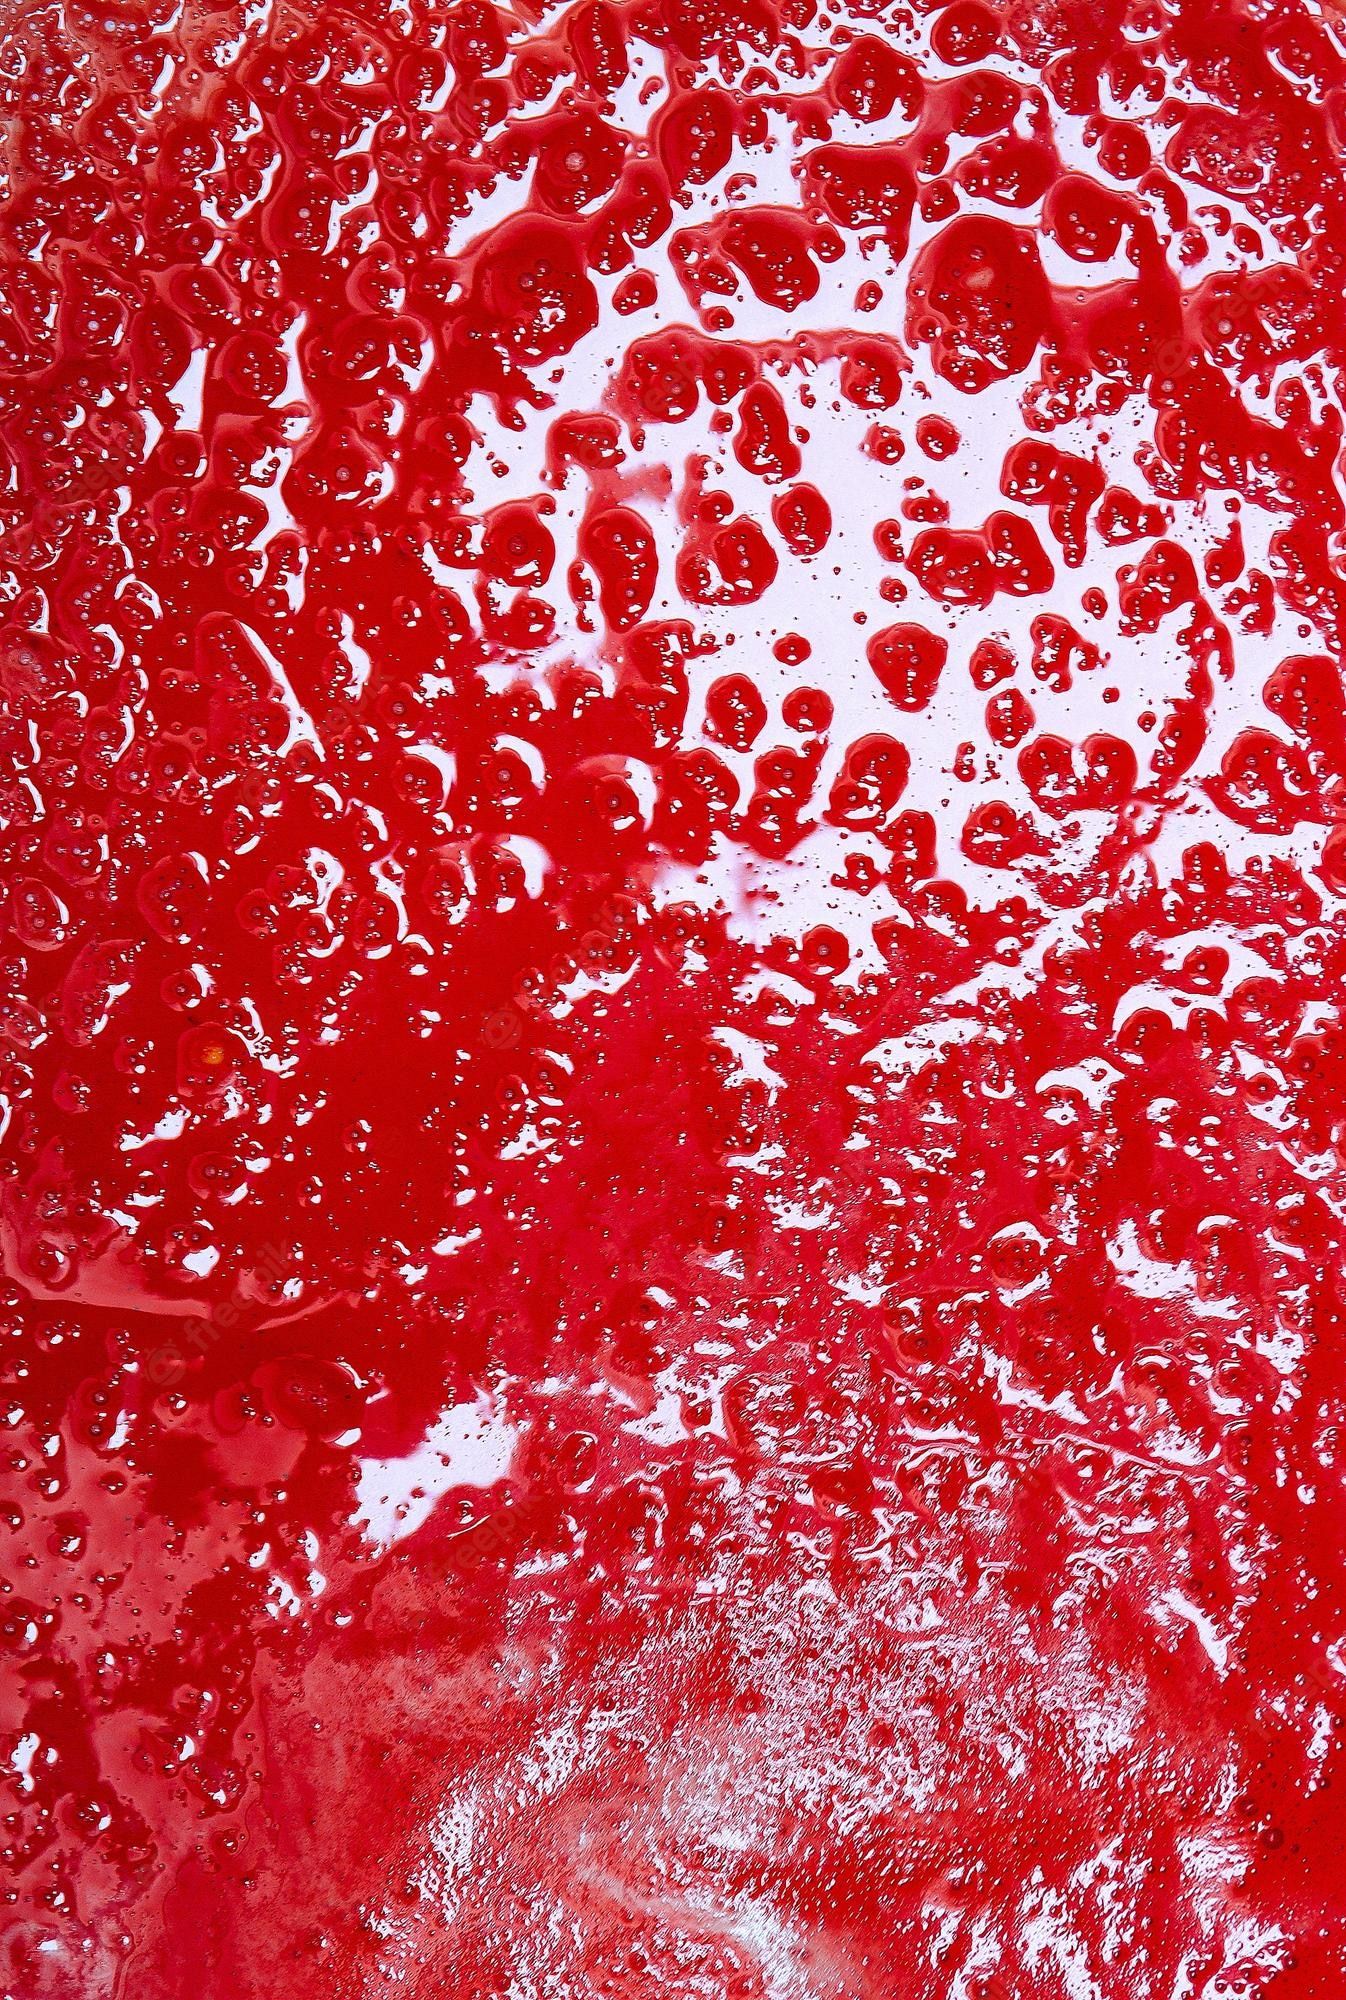 Blood Texture Picture